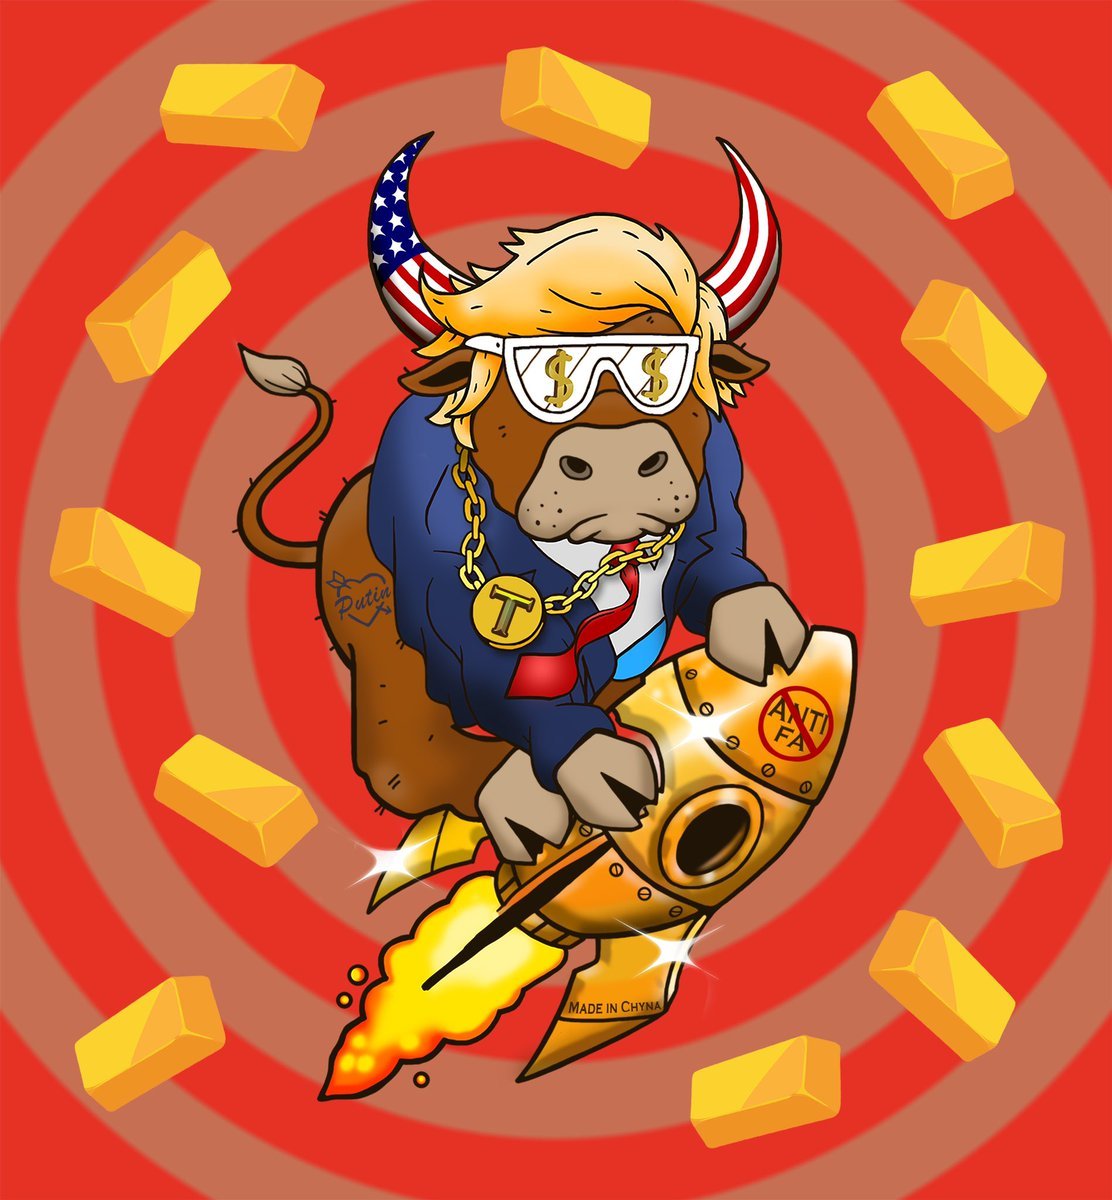 Which Wall Street Bull would you pick? Trump or Stonks?
#nft #crypto #WallStreet #wallstreetbets https://t.co/kdv1OekKeI